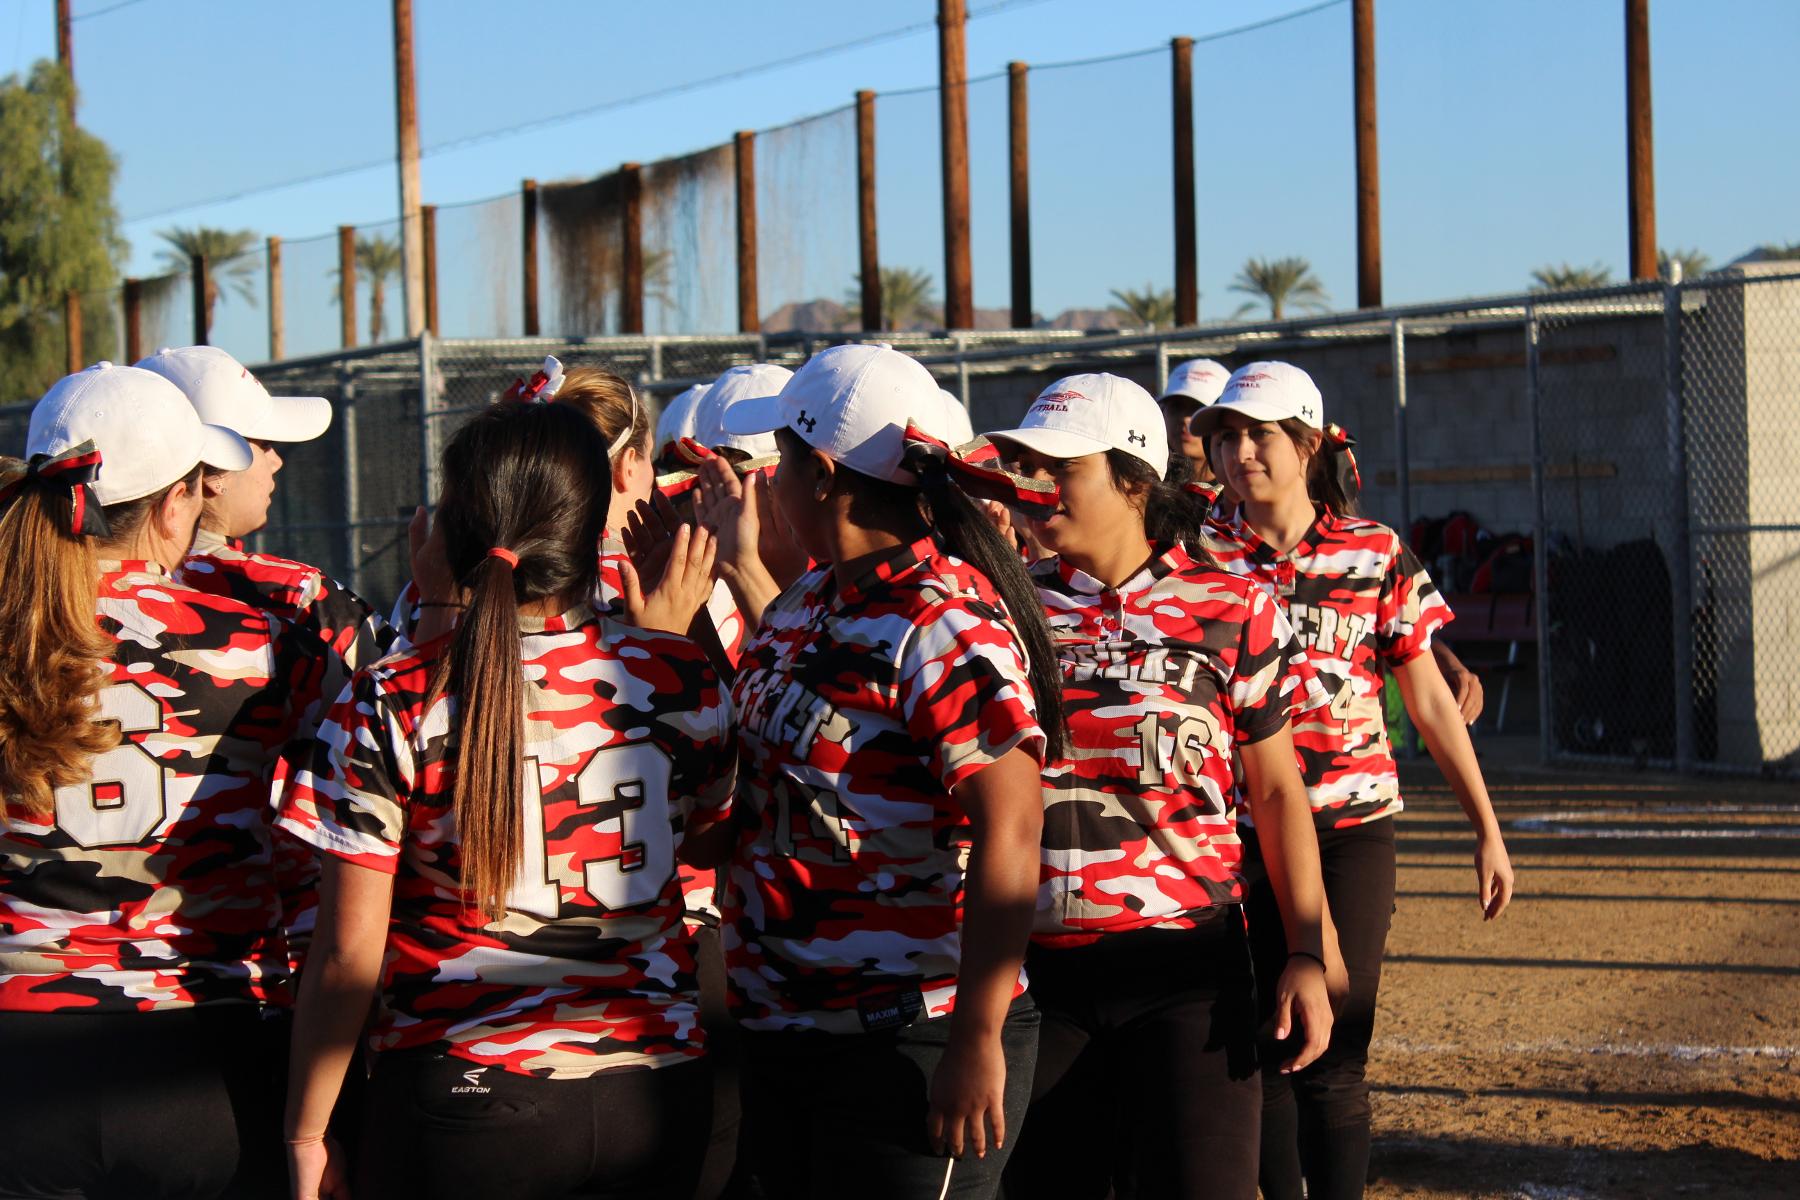 Softball Wraps Up Season with Two Big Wins Over Victor Valley